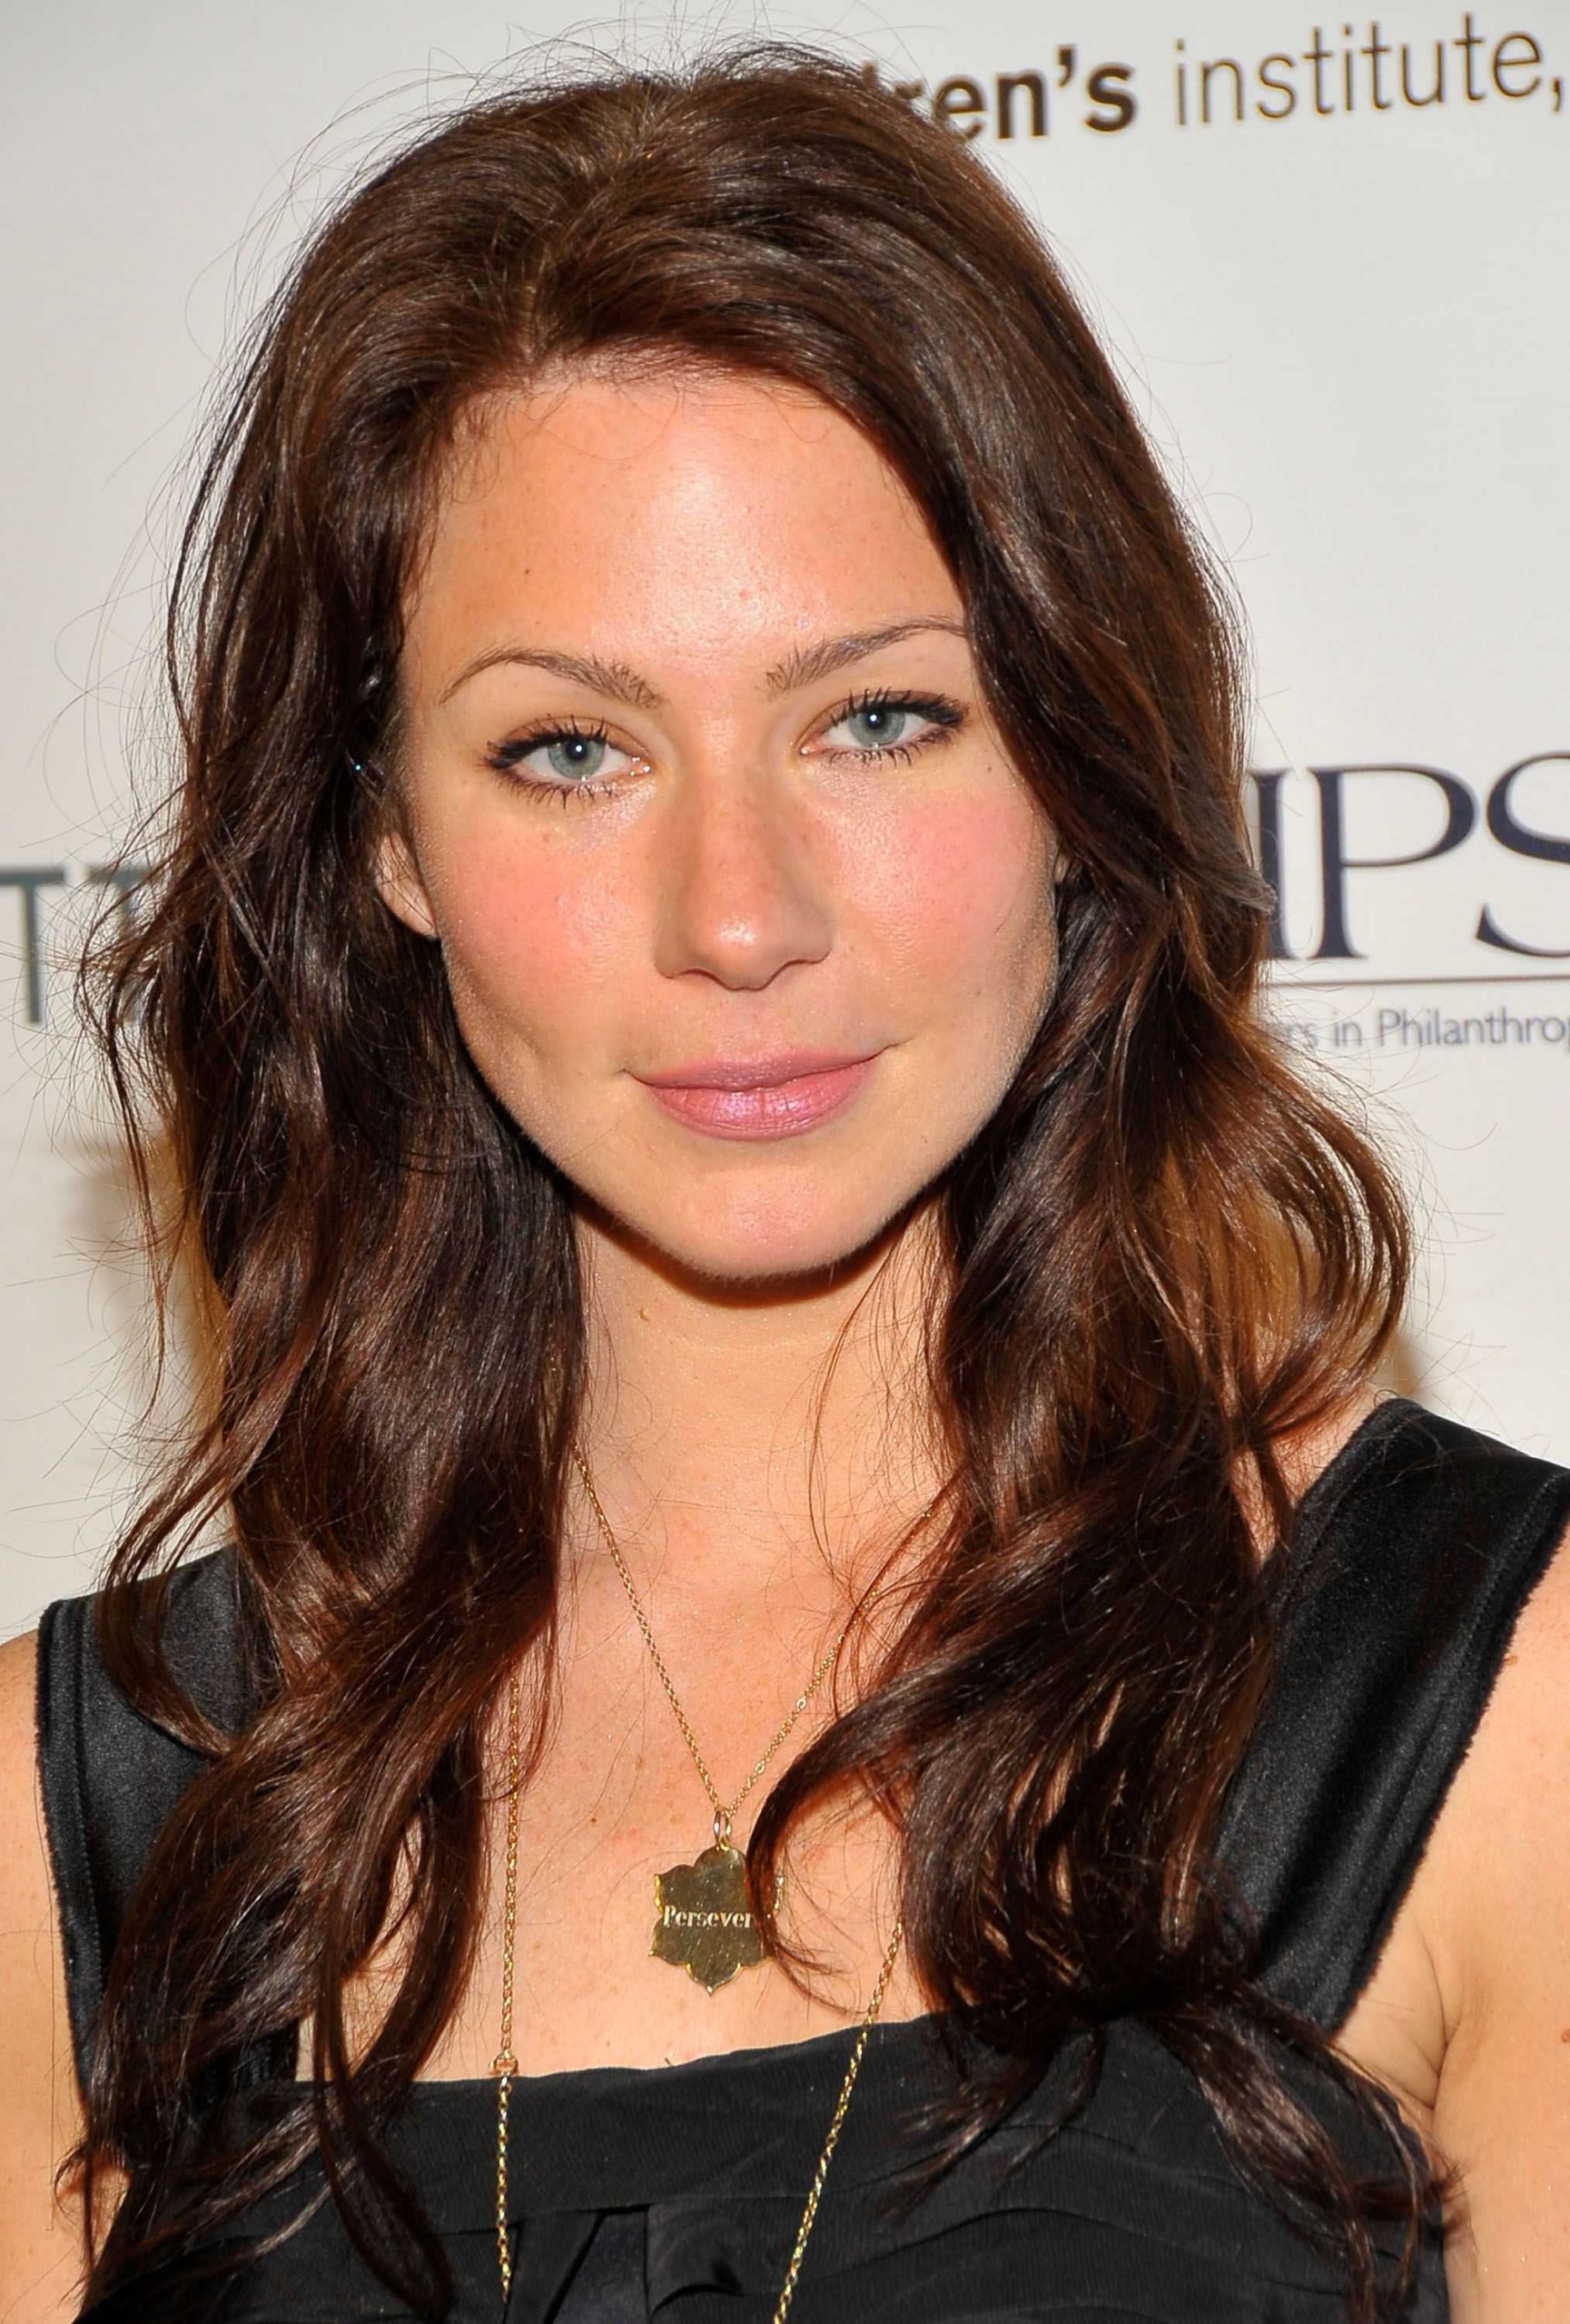 70+ Hot Pictures Of Lynn Collins Expose Her Smokin Hot Body 7